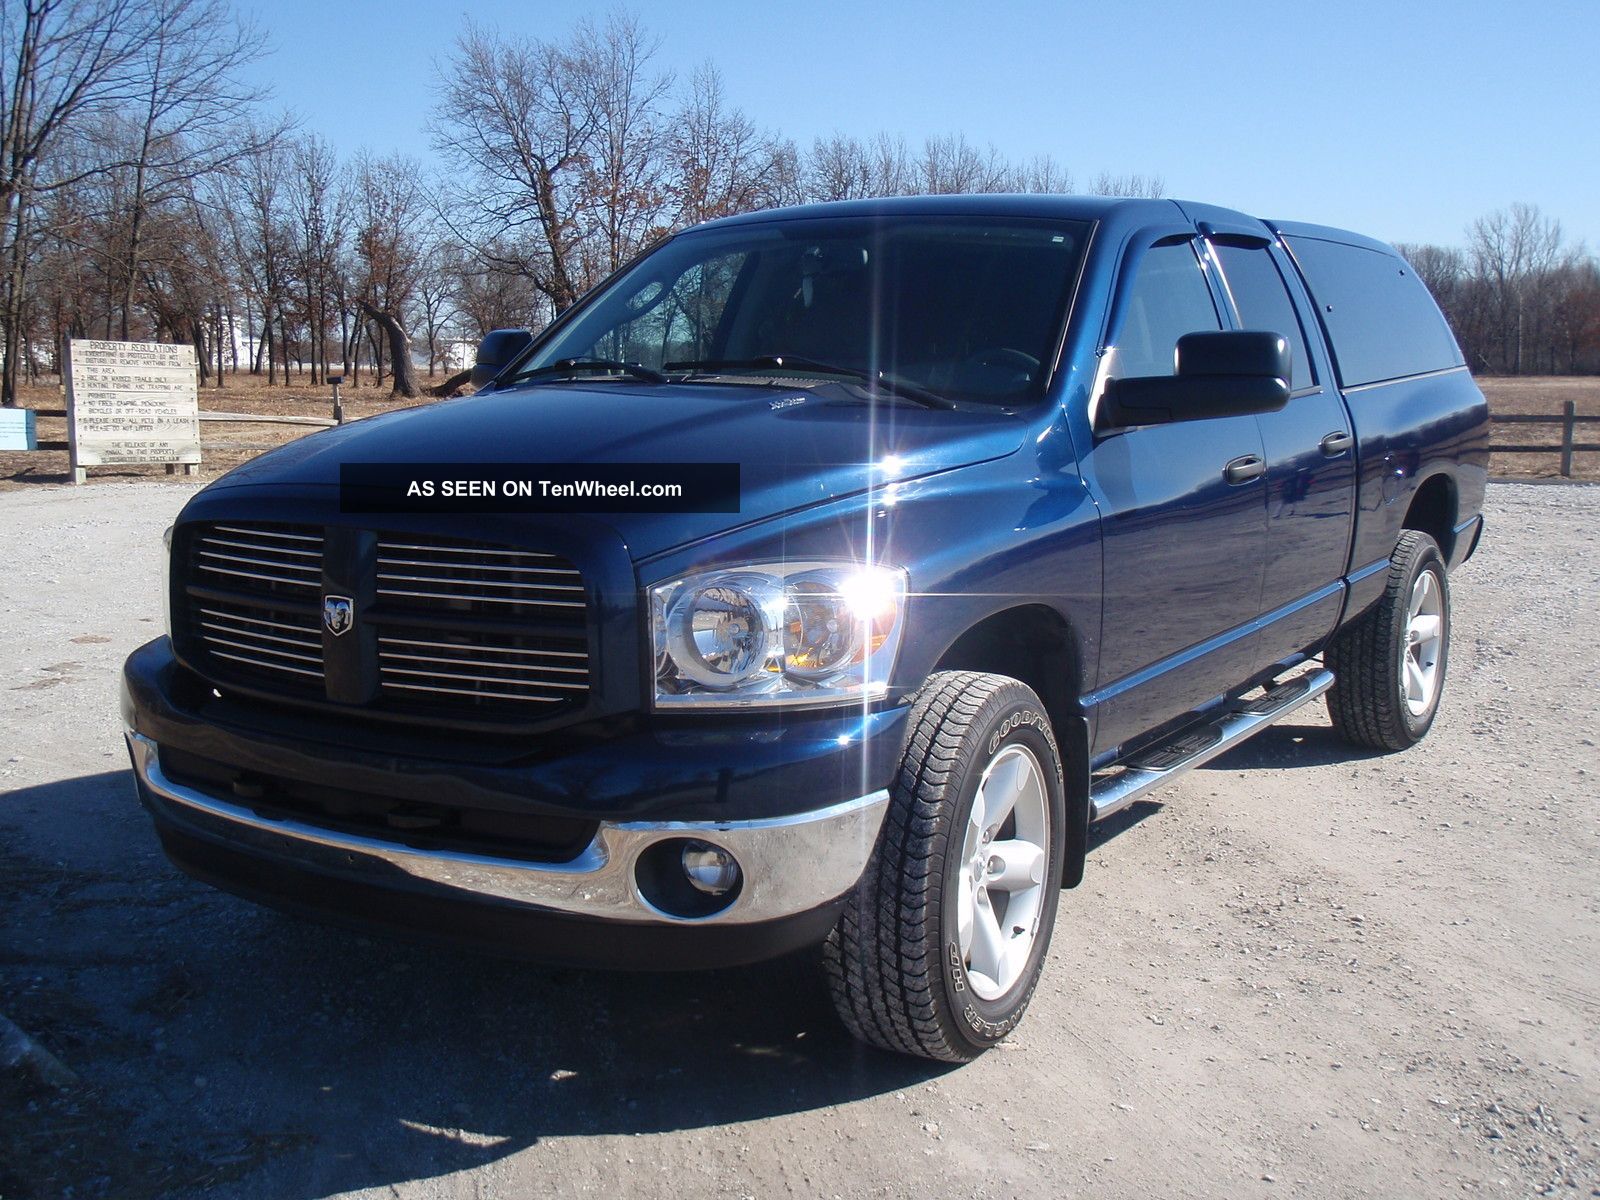 2007 Dodge Ram 1500 St 4x4 Short Bed Quad Cab / Tow Package 2007 Dodge Ram 1500 4x4 Towing Capacity